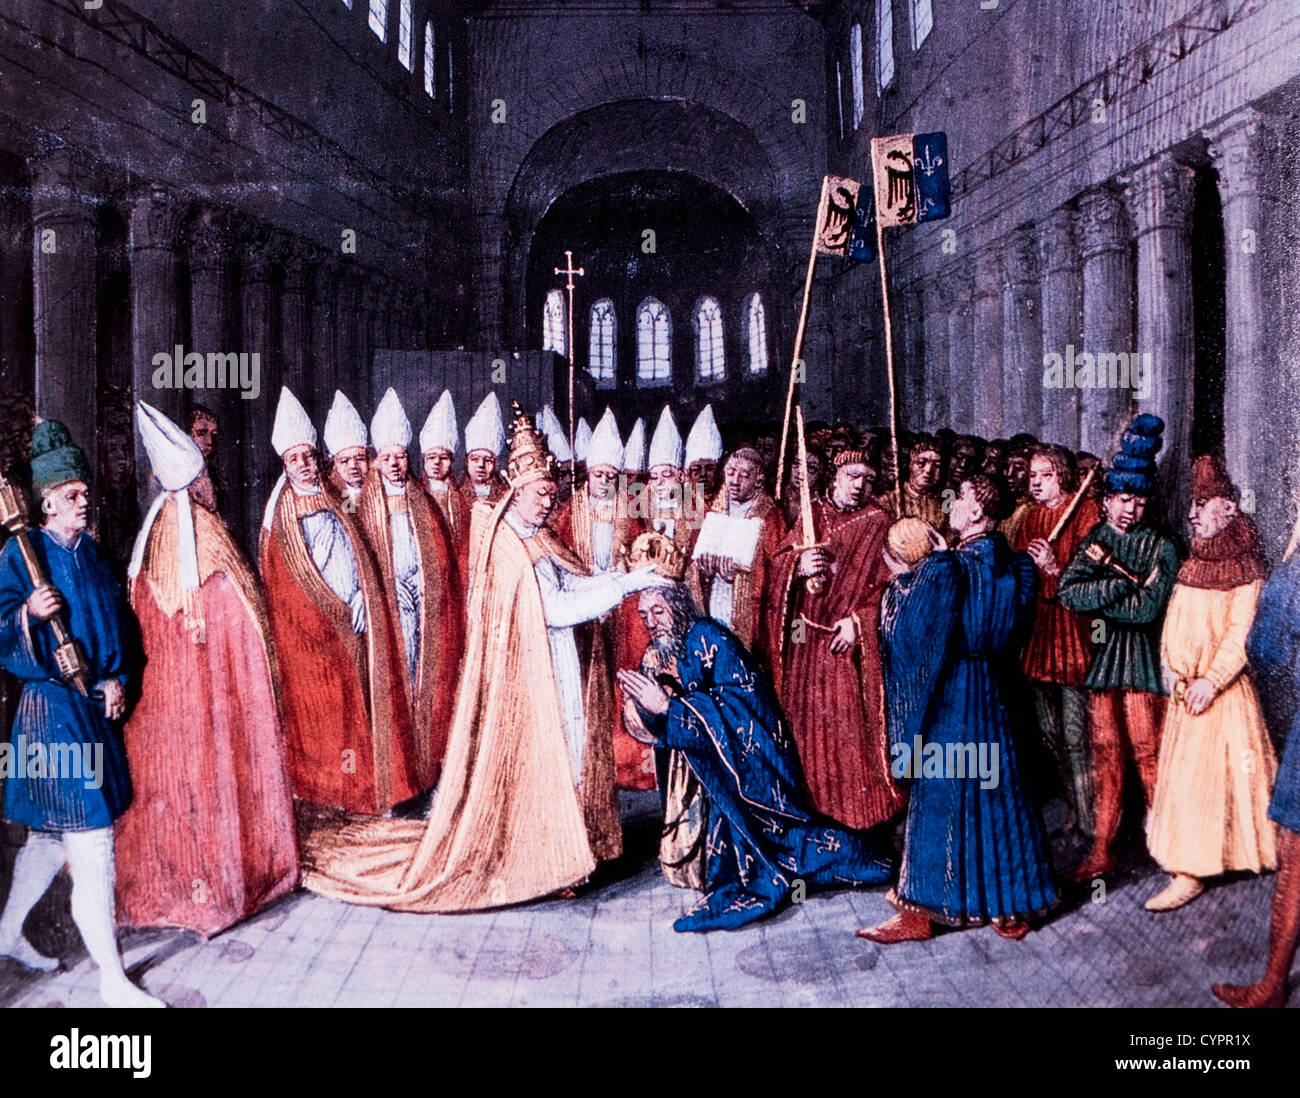 Coronation of Charlemagne, Rome, December 25, 800, Jean Fouquet, Painting, 1460 Stock Photo